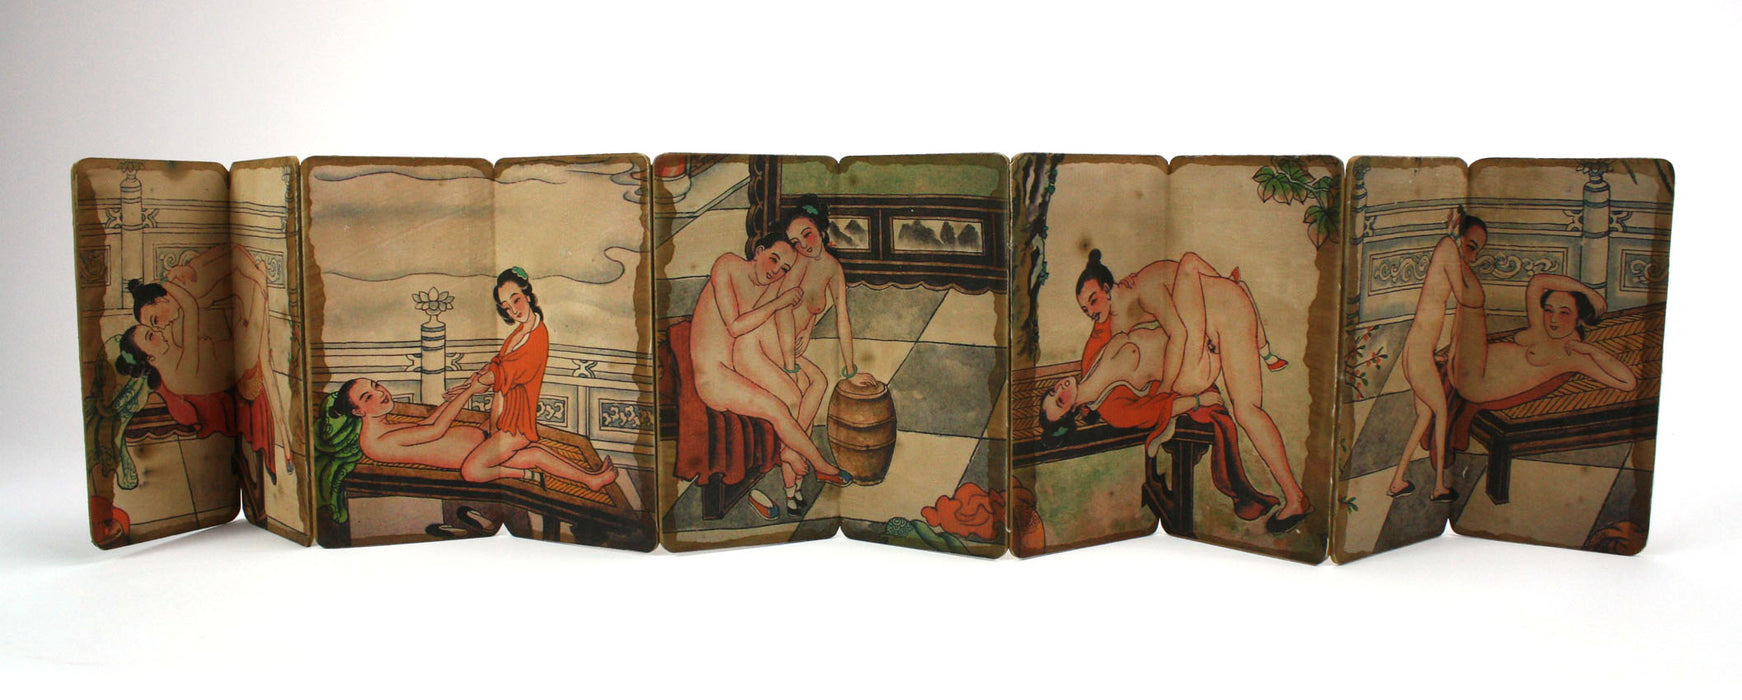 Chinese Erotica, Vintage Chinese Pillow Book, Shunga - A